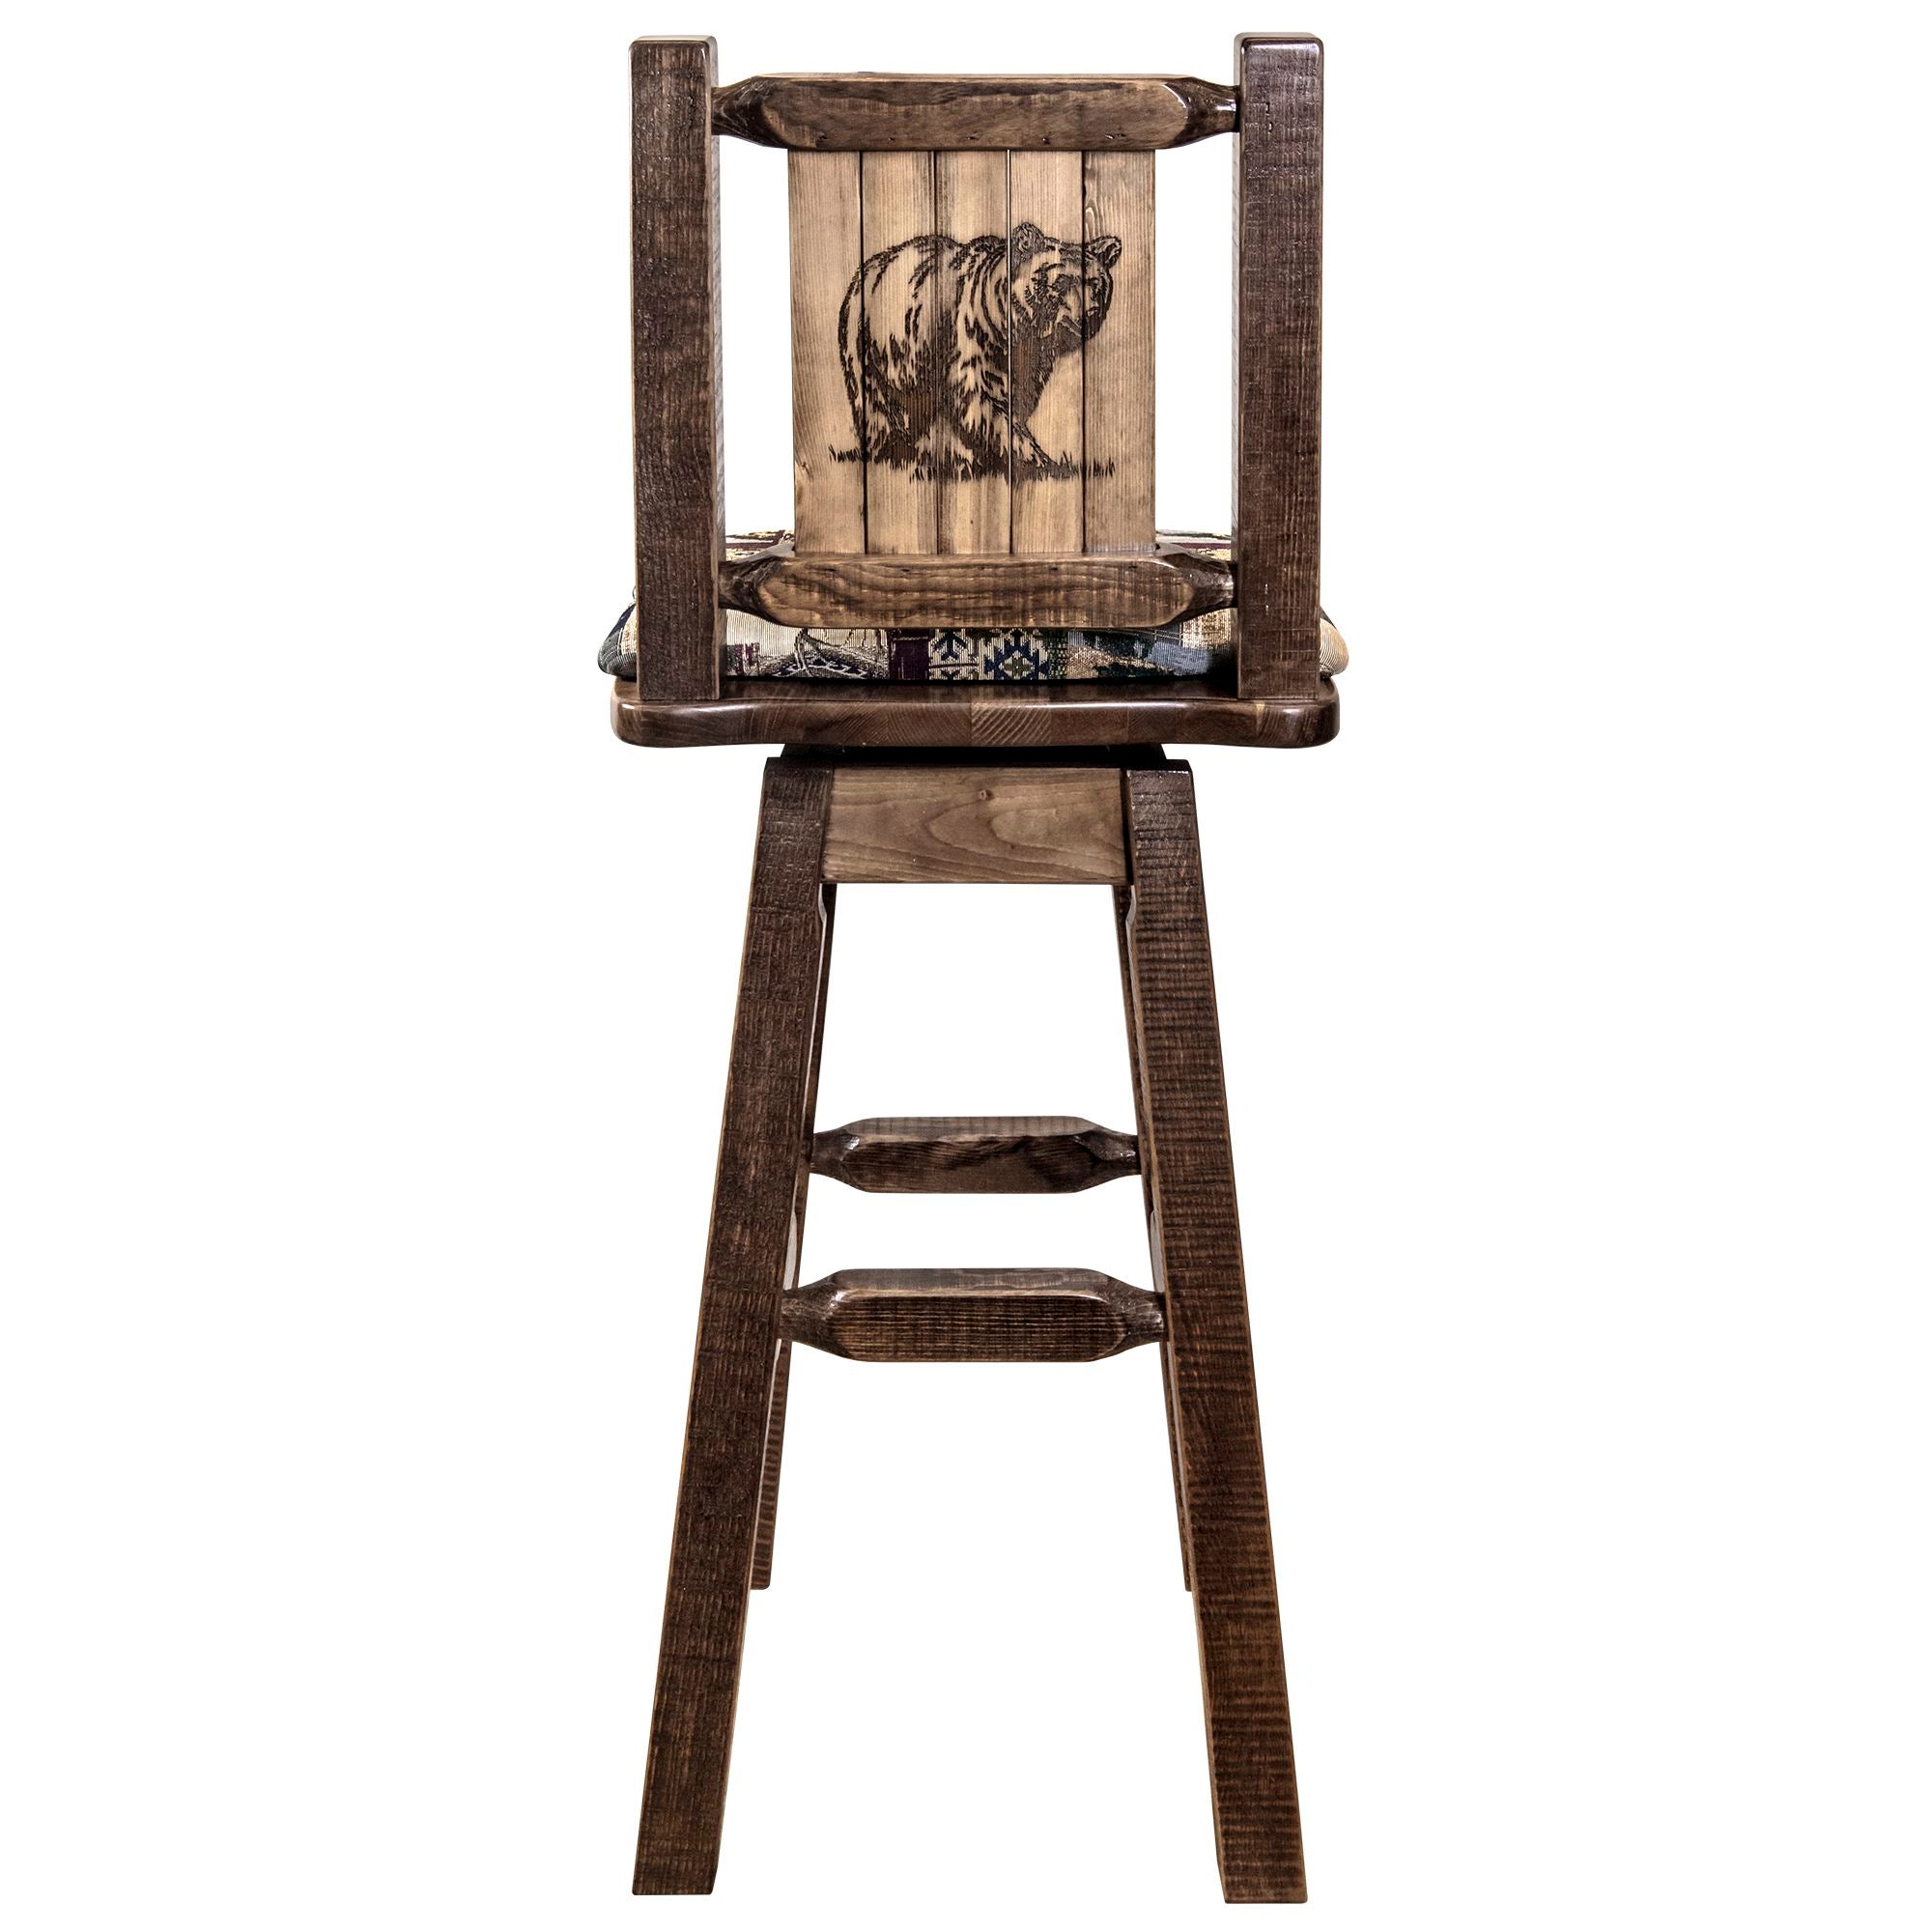 montana woodworks homestead collection barstool with back and swivel woodland pattern upholstery and laser engraved bear design mwhcbswsnrslbear back